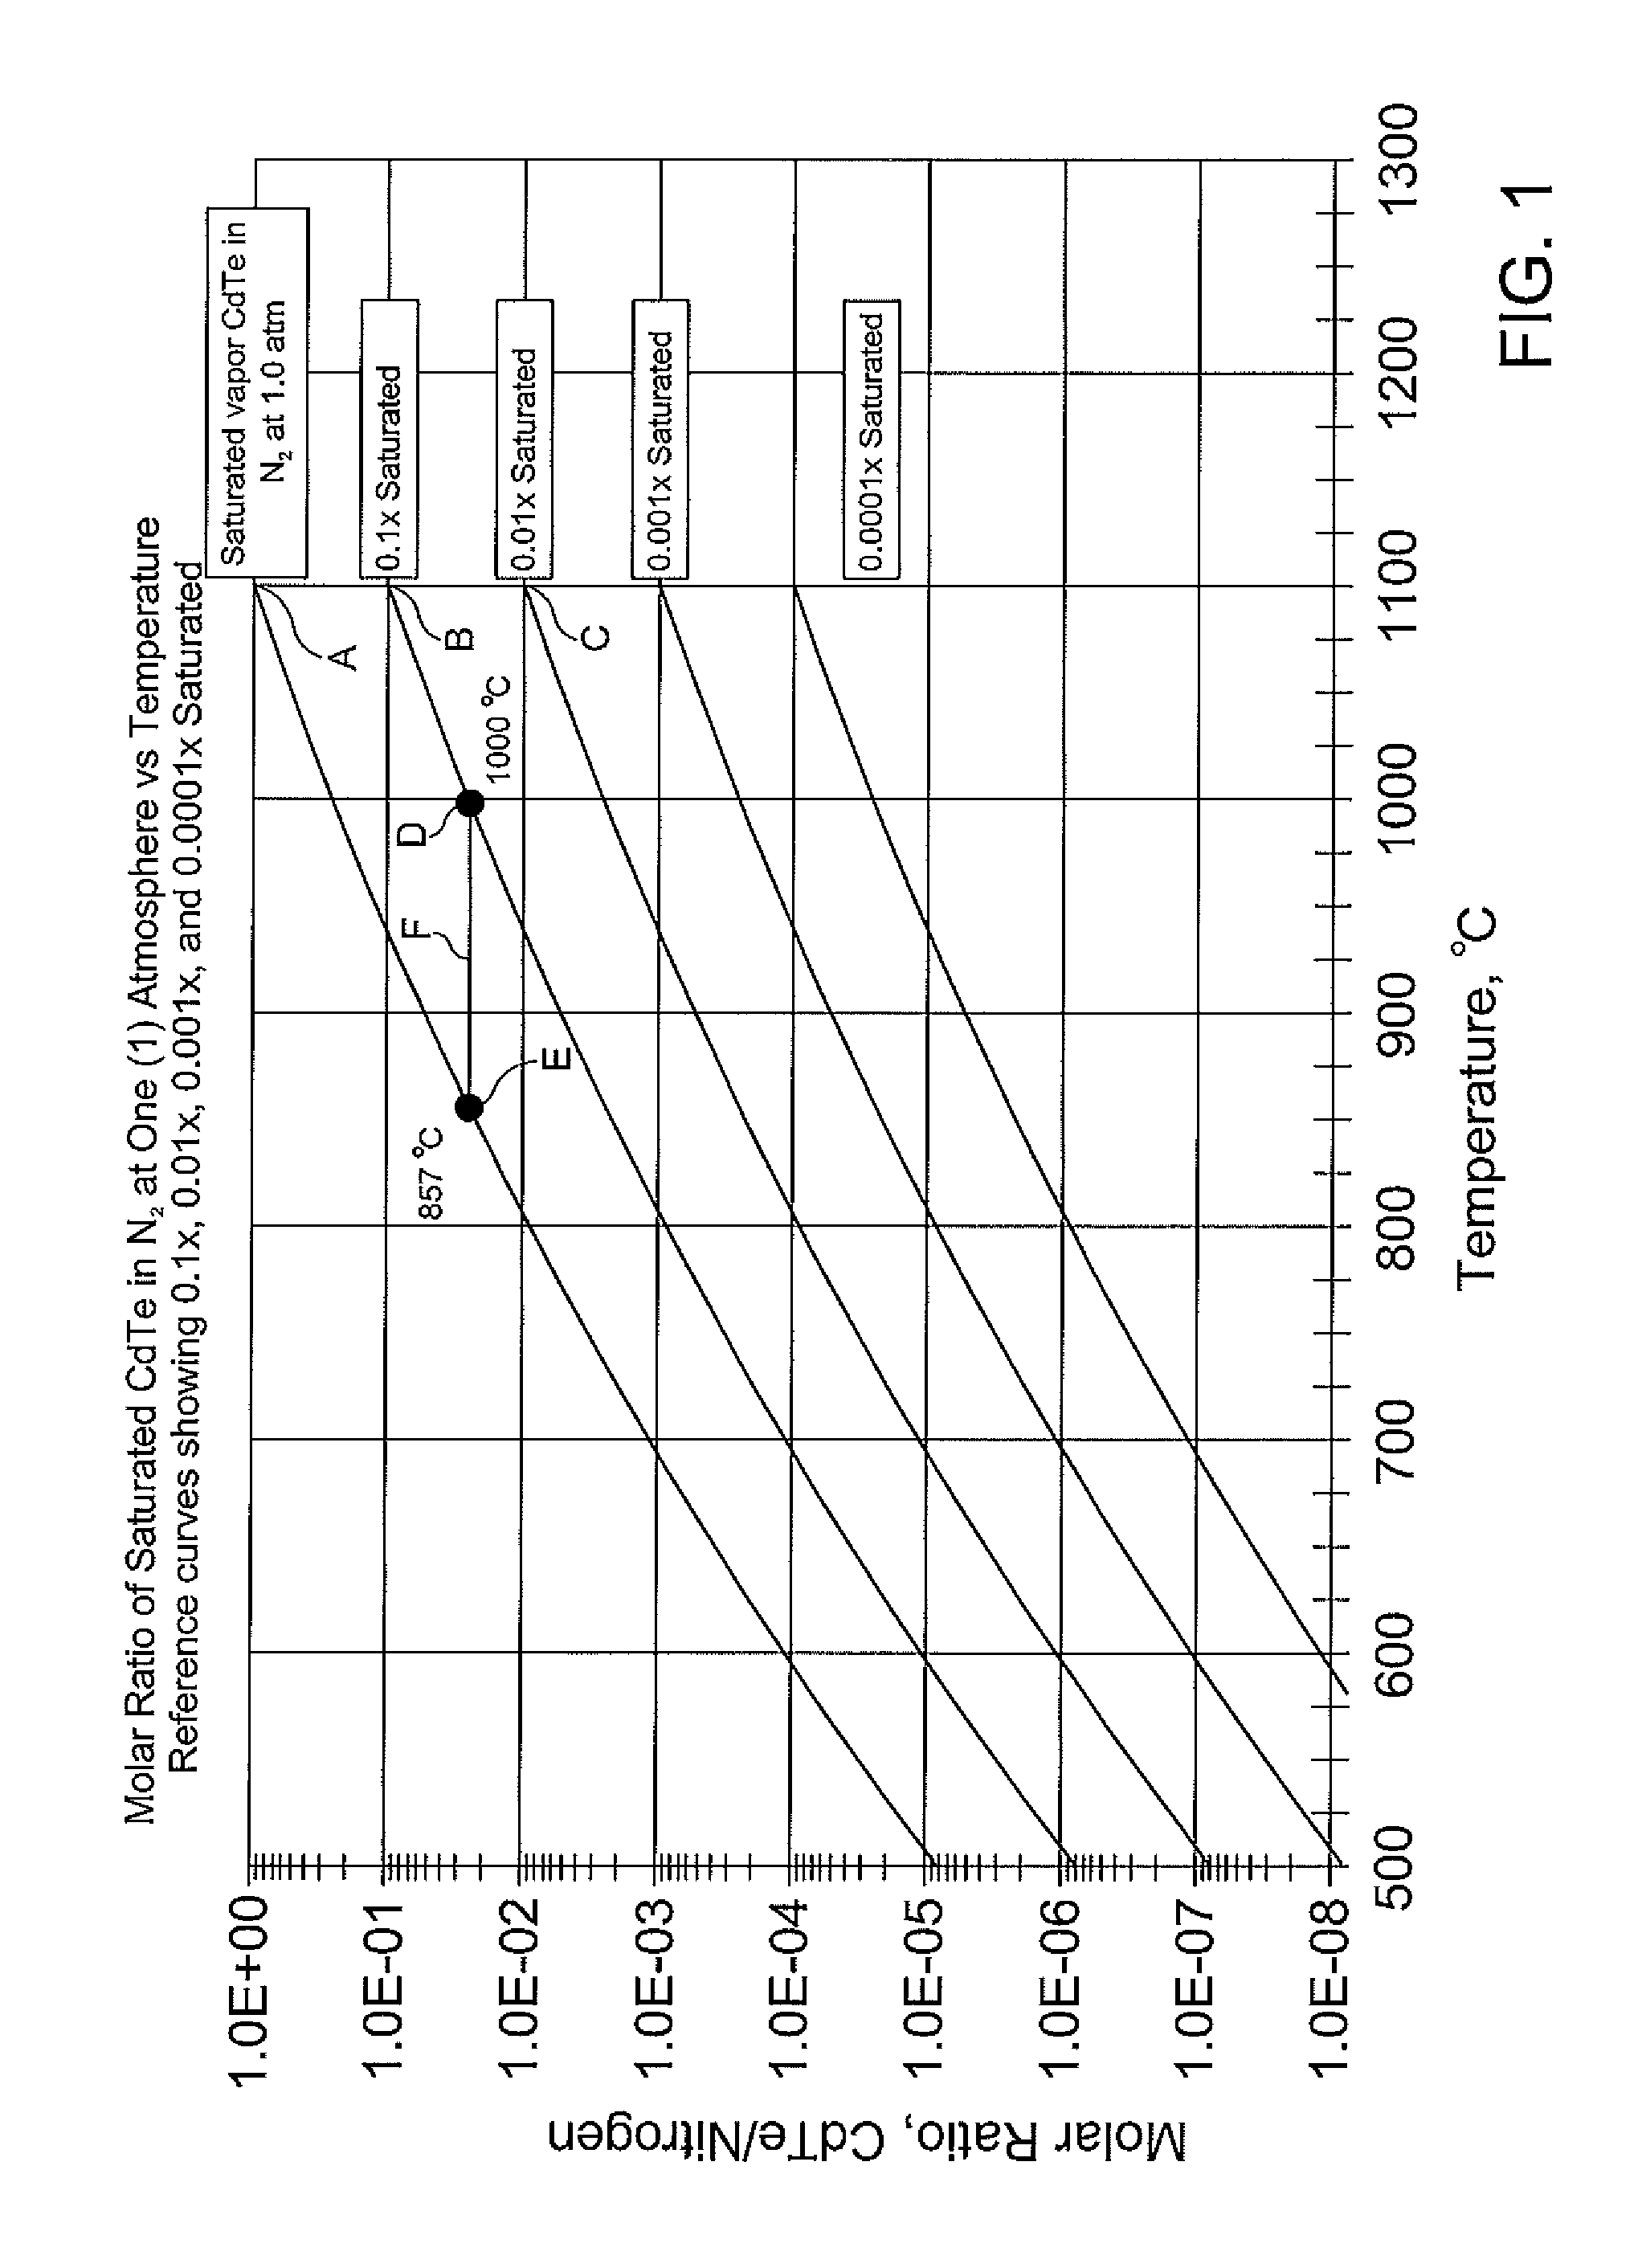 Atmospheric pressure chemical vapor deposition with saturation control